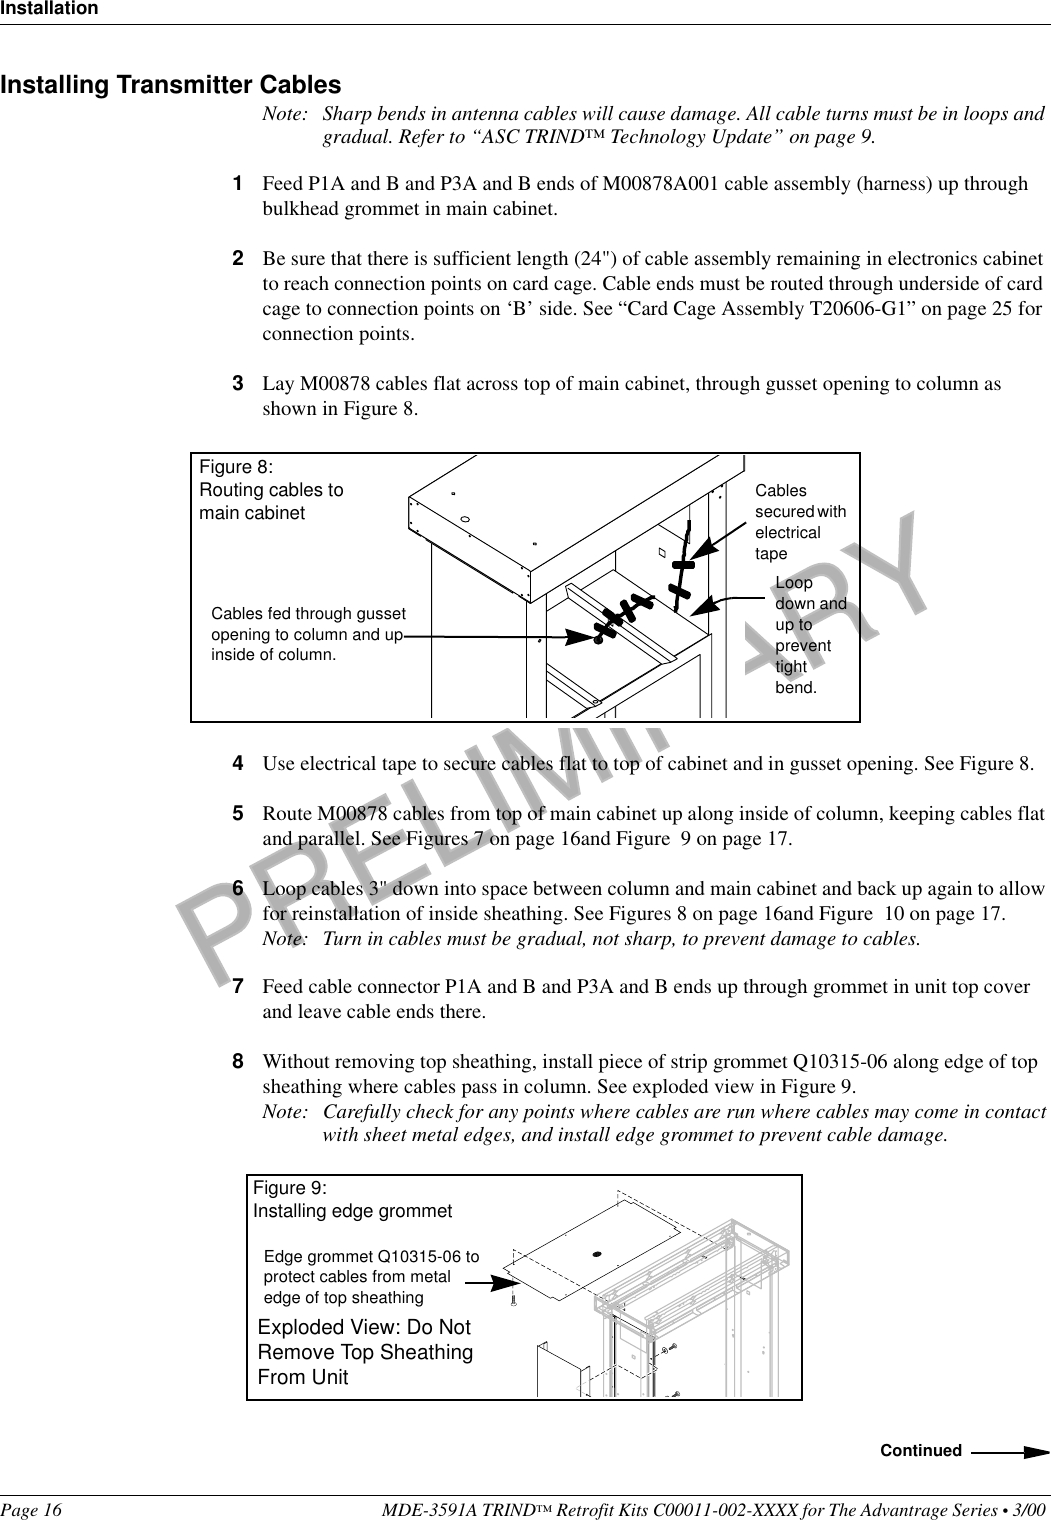 PRELIMINARYInstallationPage 16 MDE-3591A TRIND™ Retrofit Kits C00011-002-XXXX for The Advantrage Series • 3/00 Installing Transmitter CablesNote: Sharp bends in antenna cables will cause damage. All cable turns must be in loops and gradual. Refer to “ASC TRIND™ Technology Update” on page 9.1Feed P1A and B and P3A and B ends of M00878A001 cable assembly (harness) up through bulkhead grommet in main cabinet.2Be sure that there is sufficient length (24&quot;) of cable assembly remaining in electronics cabinet to reach connection points on card cage. Cable ends must be routed through underside of card cage to connection points on ‘B’ side. See “Card Cage Assembly T20606-G1” on page 25 for connection points.3Lay M00878 cables flat across top of main cabinet, through gusset opening to column as shown in Figure 8.4Use electrical tape to secure cables flat to top of cabinet and in gusset opening. See Figure 8.5Route M00878 cables from top of main cabinet up along inside of column, keeping cables flat and parallel. See Figures 7 on page 16and Figure  9 on page 17.6Loop cables 3&quot; down into space between column and main cabinet and back up again to allow for reinstallation of inside sheathing. See Figures 8 on page 16and Figure  10 on page 17.Note: Turn in cables must be gradual, not sharp, to prevent damage to cables.7Feed cable connector P1A and B and P3A and B ends up through grommet in unit top cover and leave cable ends there. 8Without removing top sheathing, install piece of strip grommet Q10315-06 along edge of top sheathing where cables pass in column. See exploded view in Figure 9.Note: Carefully check for any points where cables are run where cables may come in contact with sheet metal edges, and install edge grommet to prevent cable damage. Cables fed through gusset opening to column and up inside of column.Figure 8: Routing cables to main cabinet Cables secured with electrical tapeLoop down and up to prevent tight bend.ContinuedEdge grommet Q10315-06 to protect cables from metal edge of top sheathingFigure 9:Installing edge grommetExploded View: Do Not Remove Top Sheathing From Unit